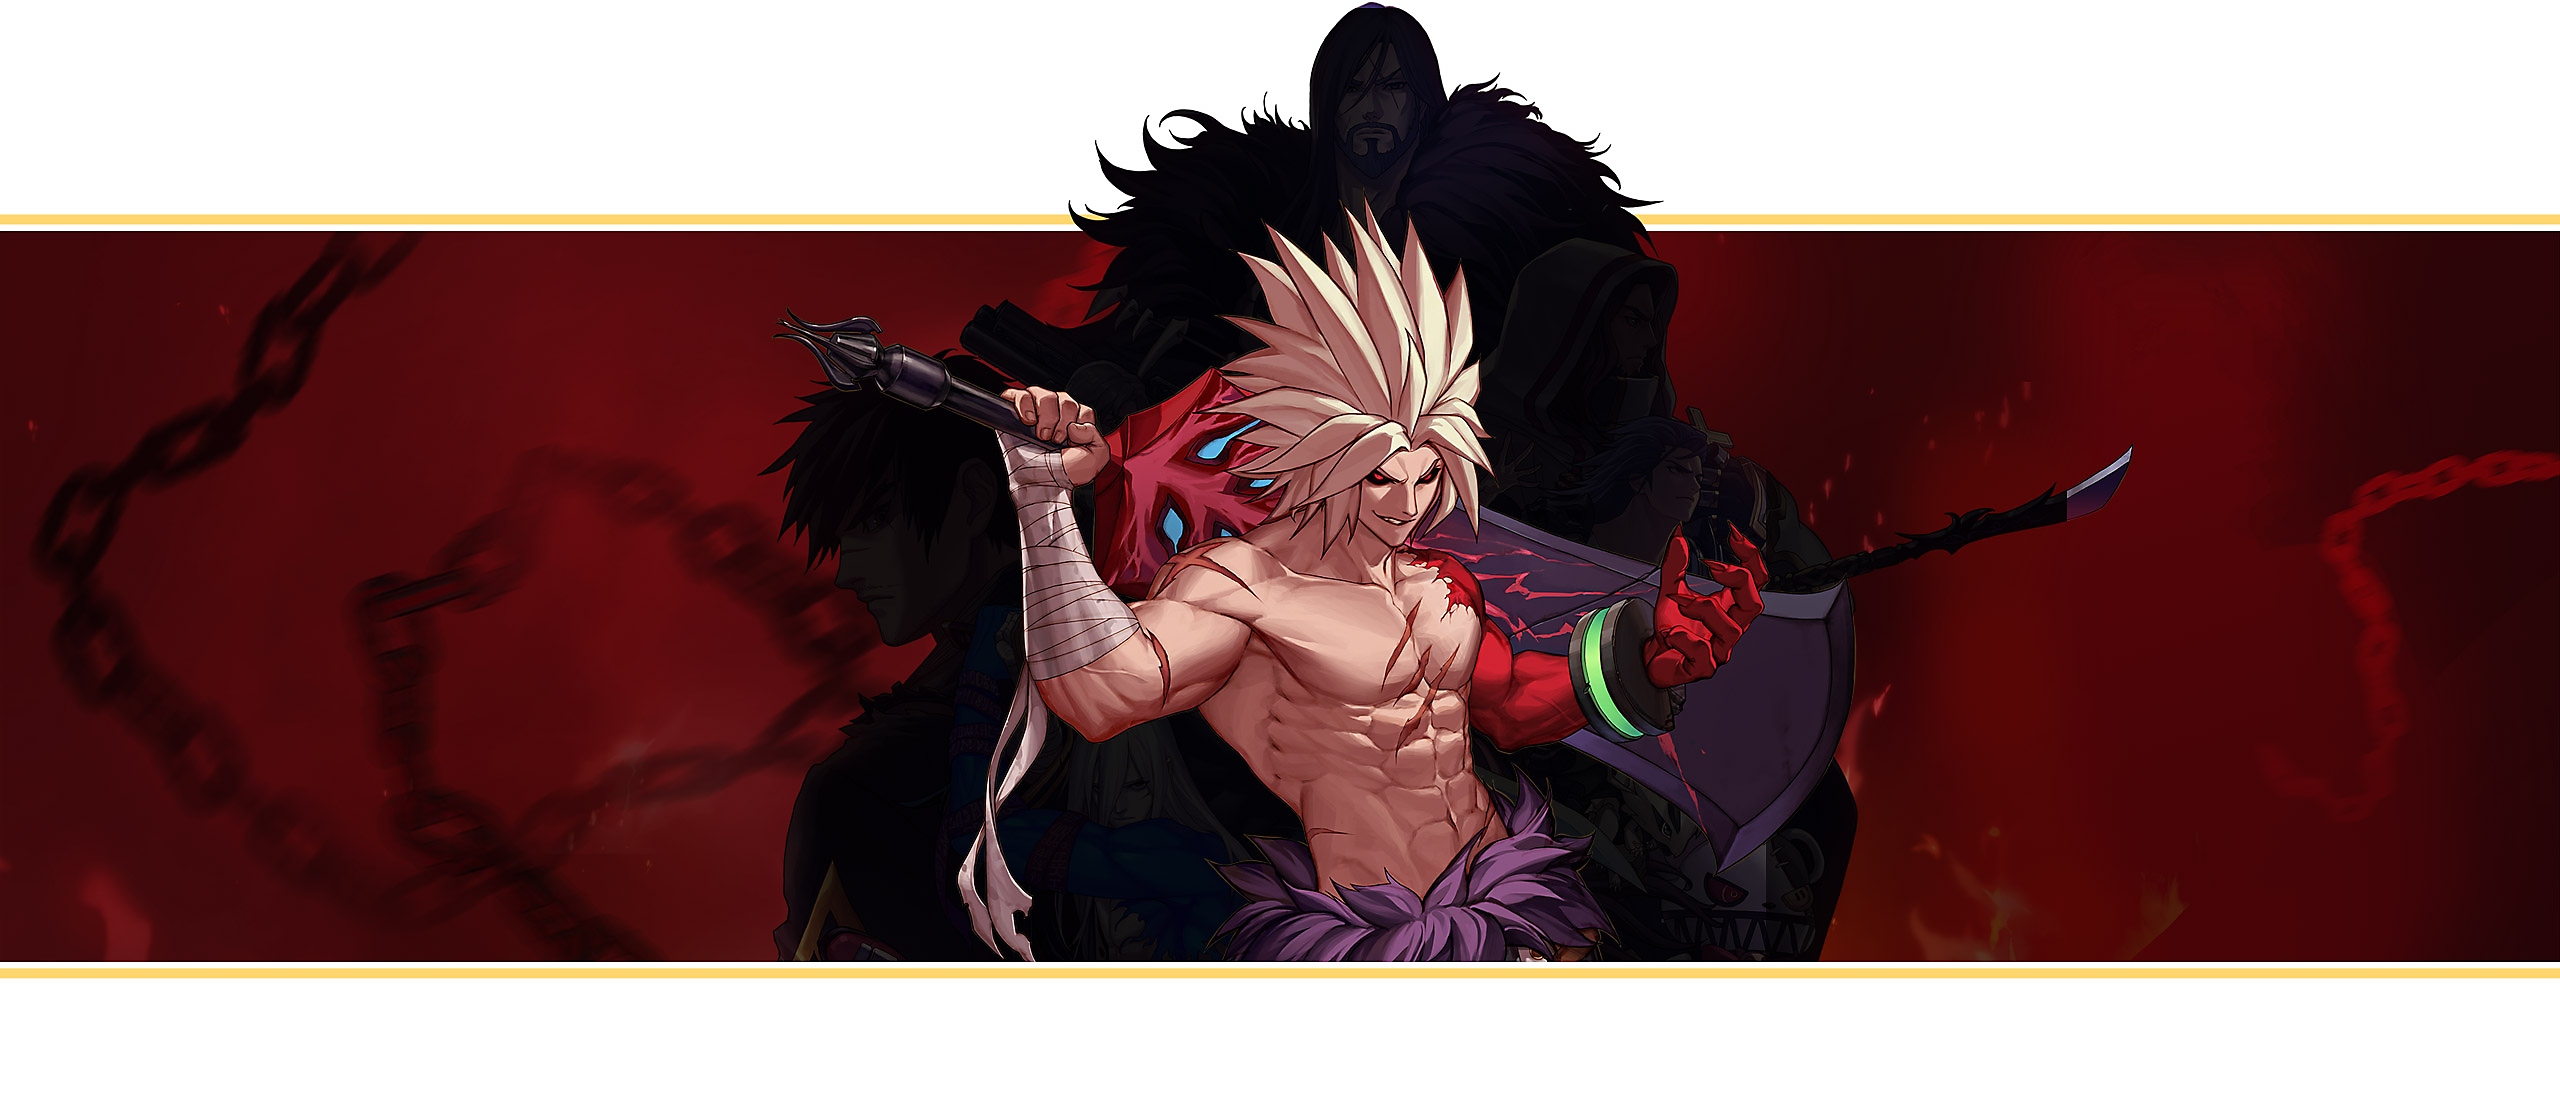 DNF duel feature banner based on key art from the game; a shirtless character holds a very large, very broad sword over one shoulder.